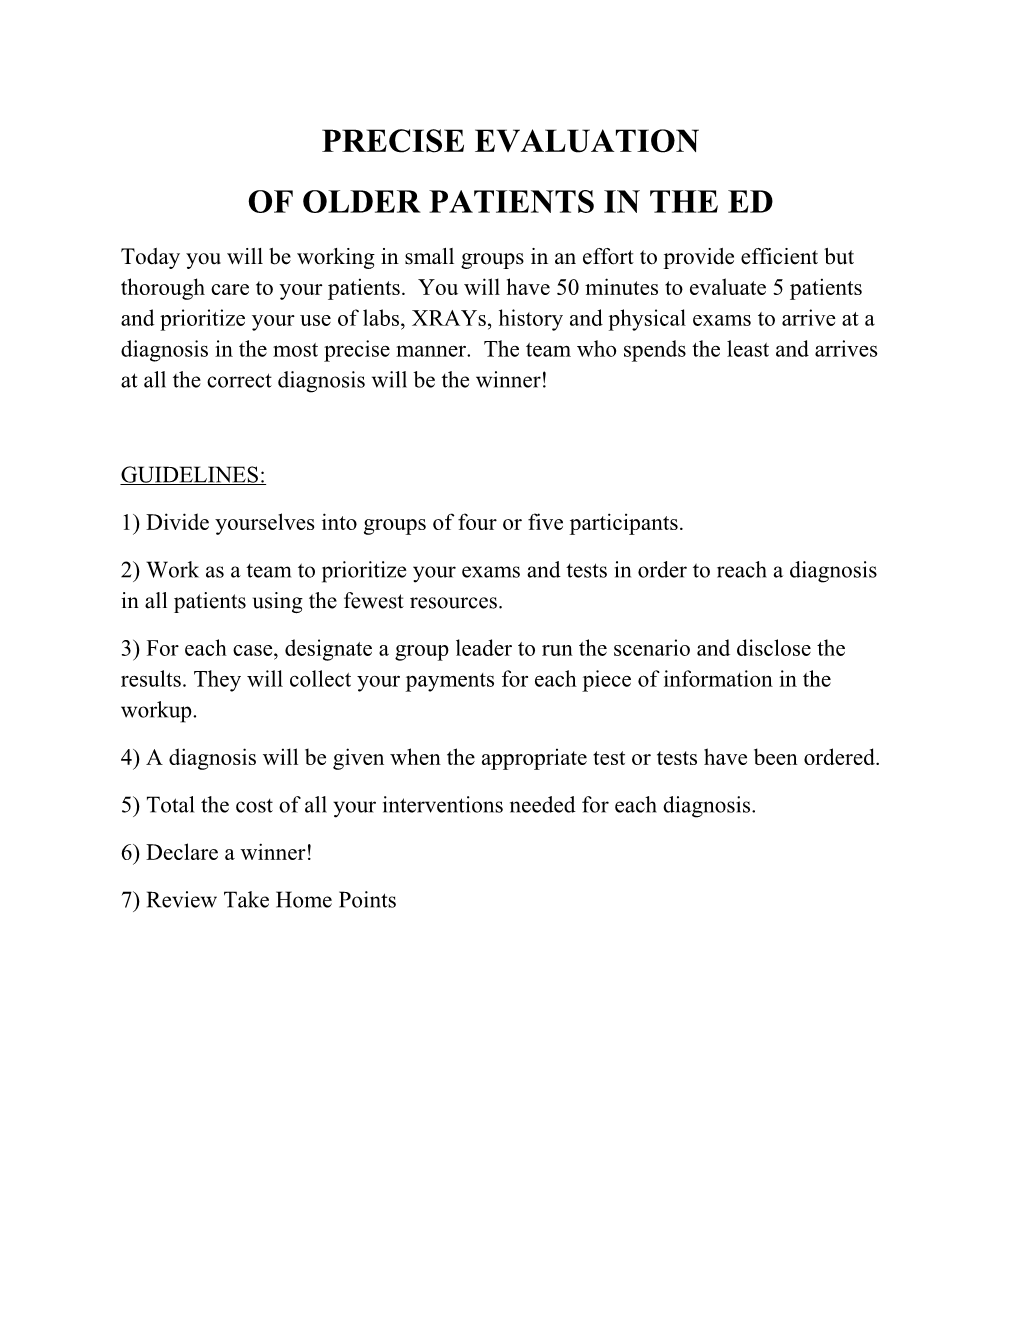 Of Older Patients in the Ed